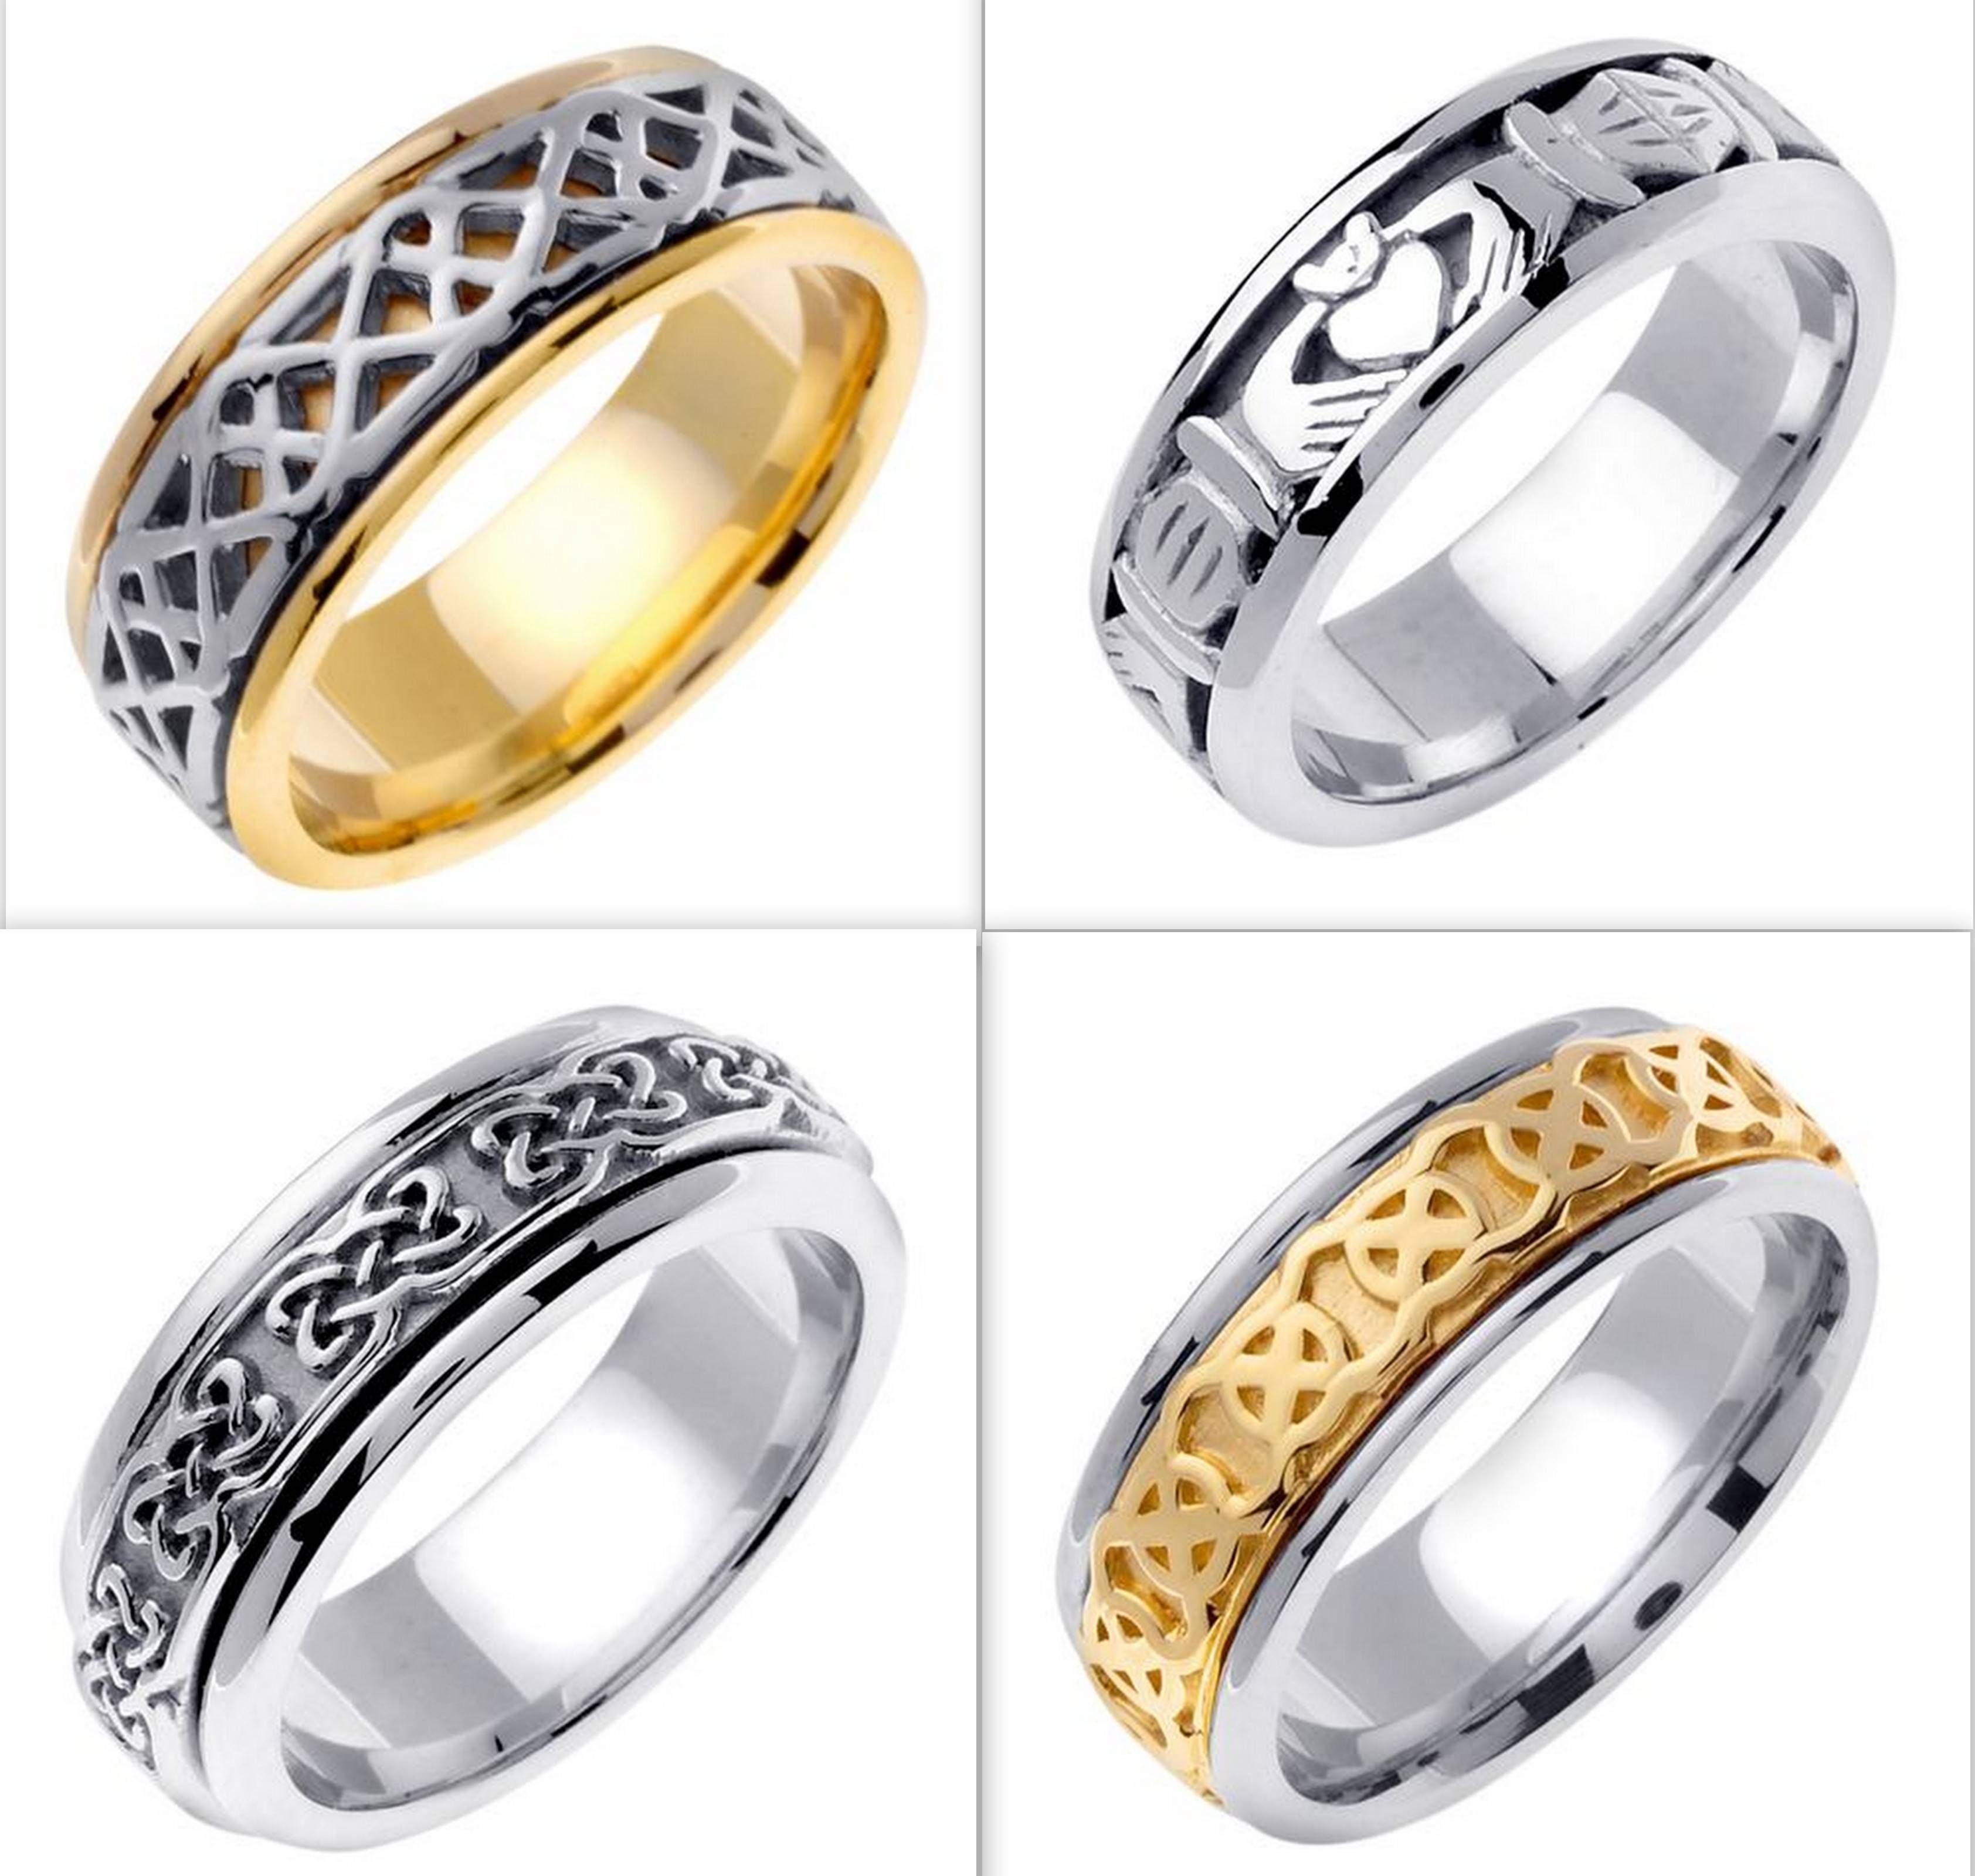 Several Things To Select Irish Wedding Rings | Wedding Ideas Intended For Mens Irish Wedding Rings (View 3 of 15)